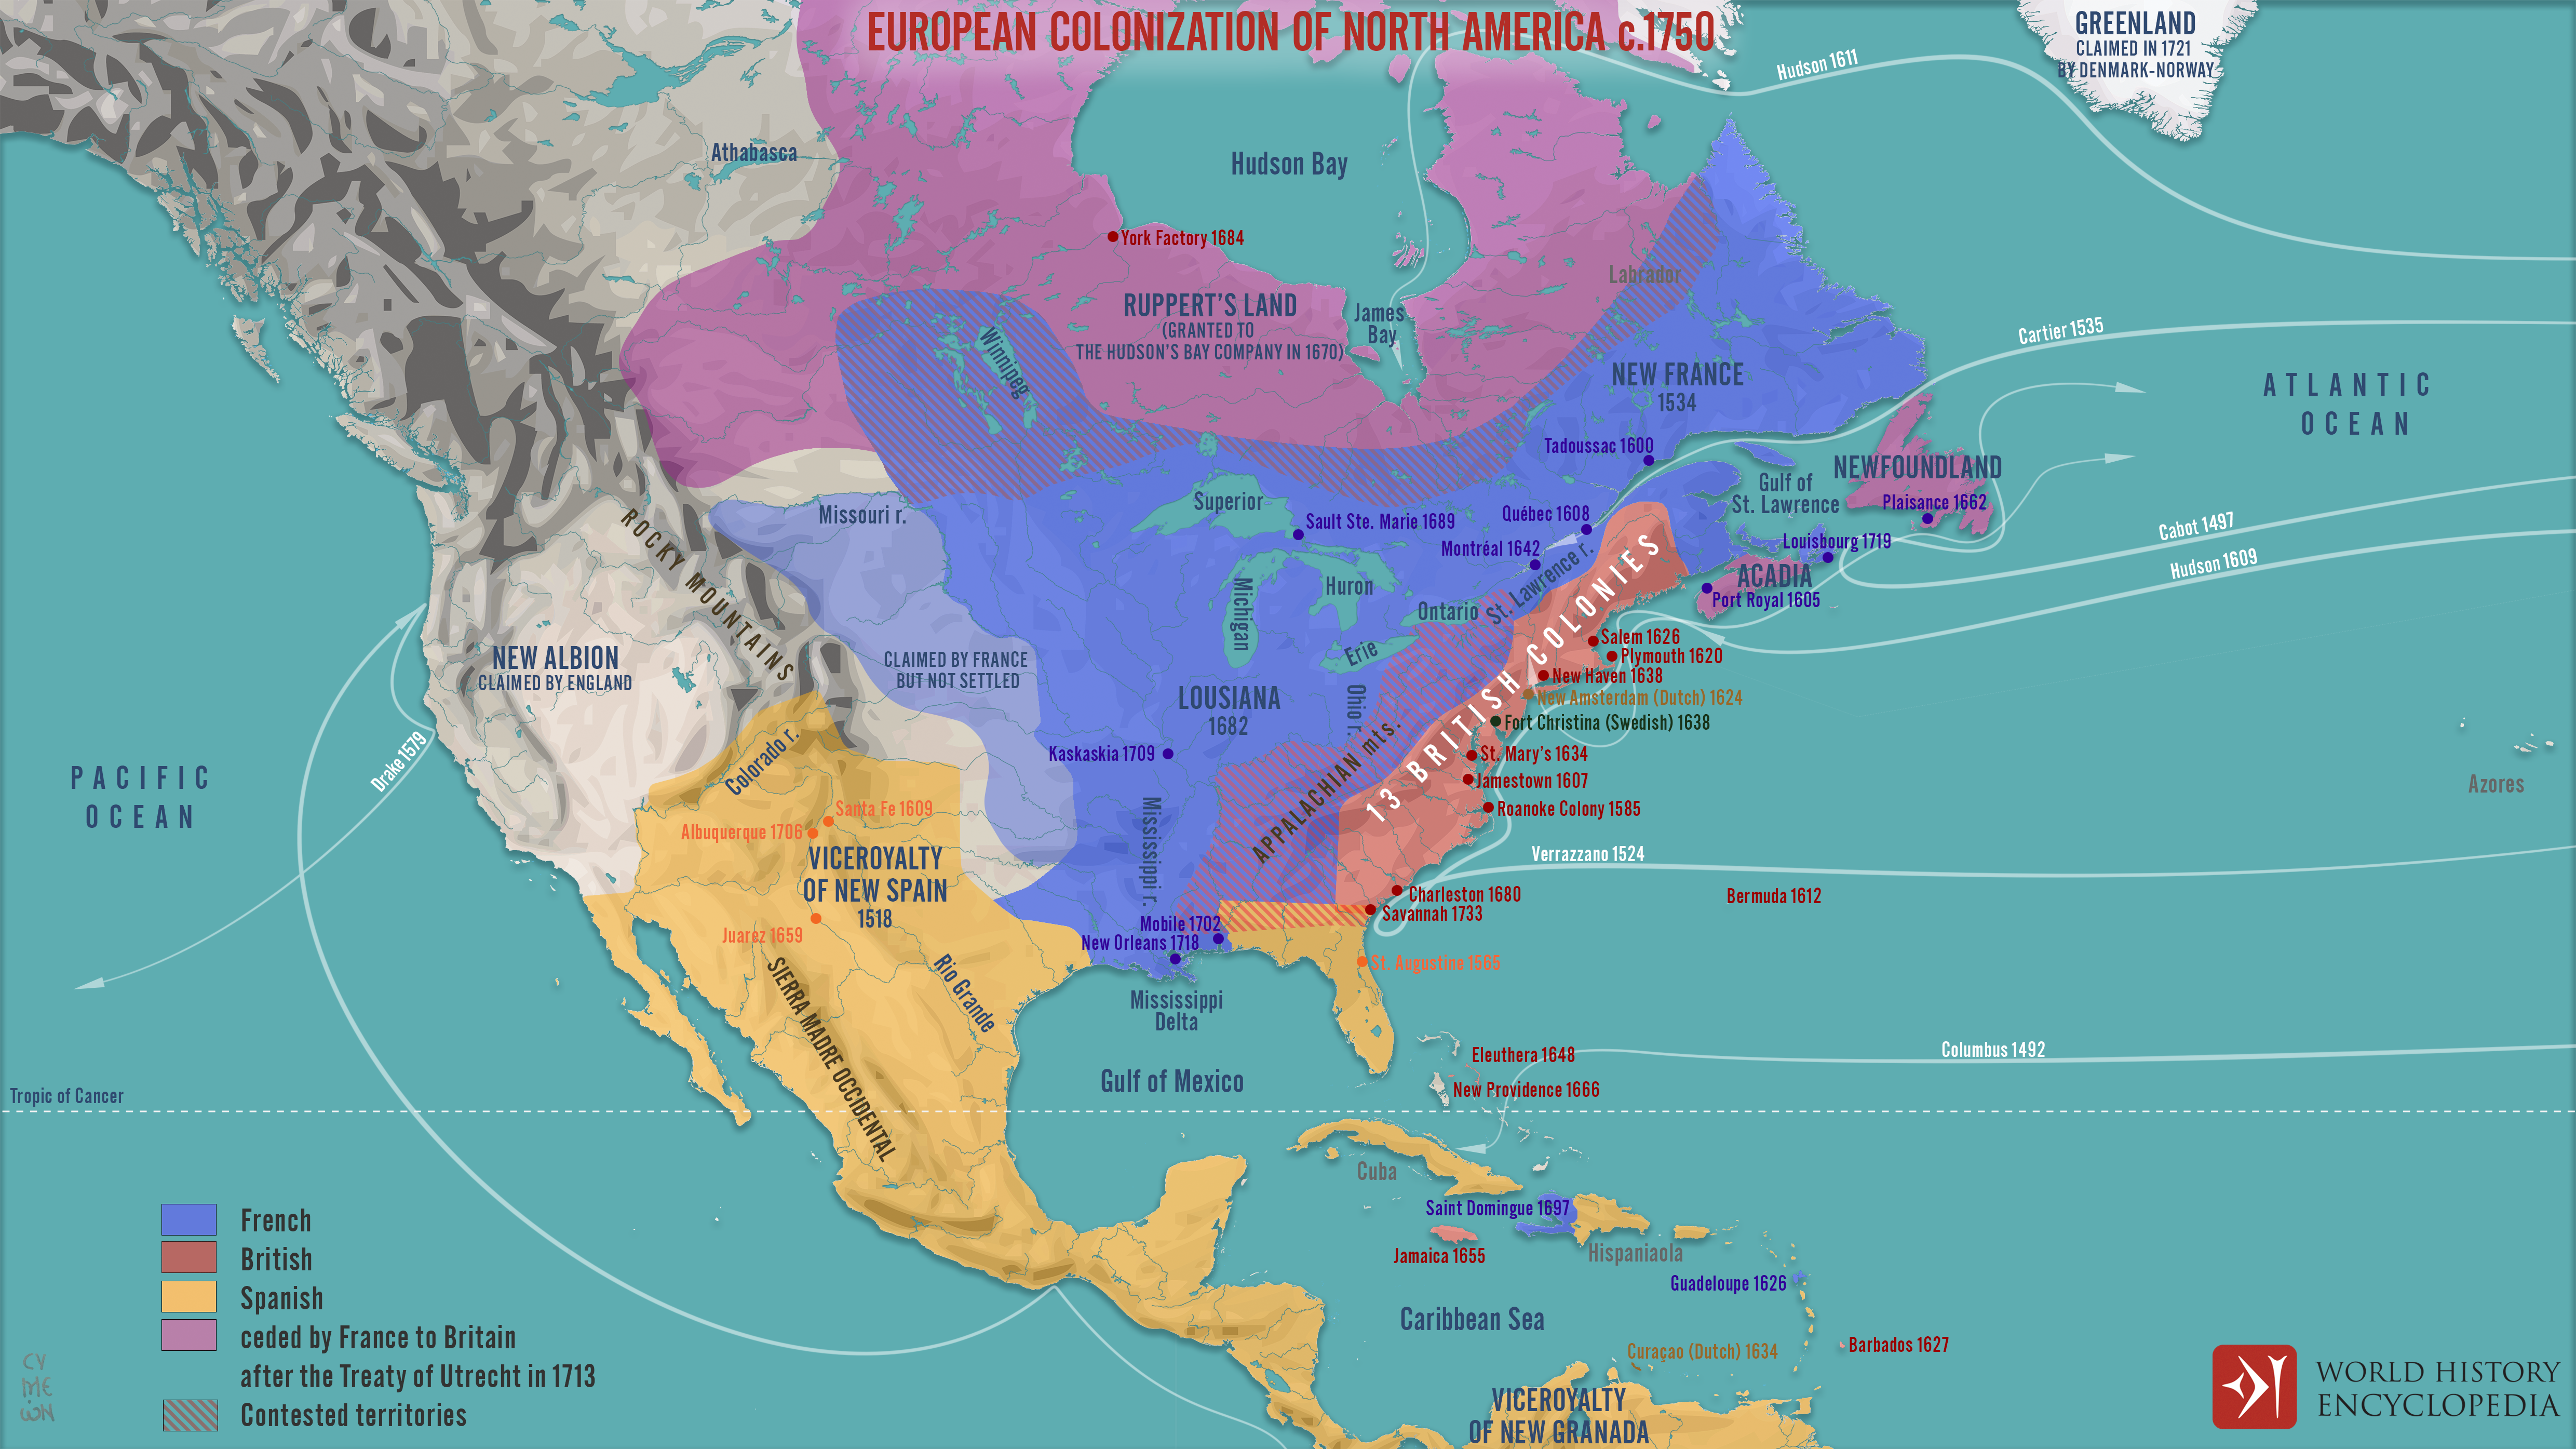 French, British, and Spanish colonialization of North America